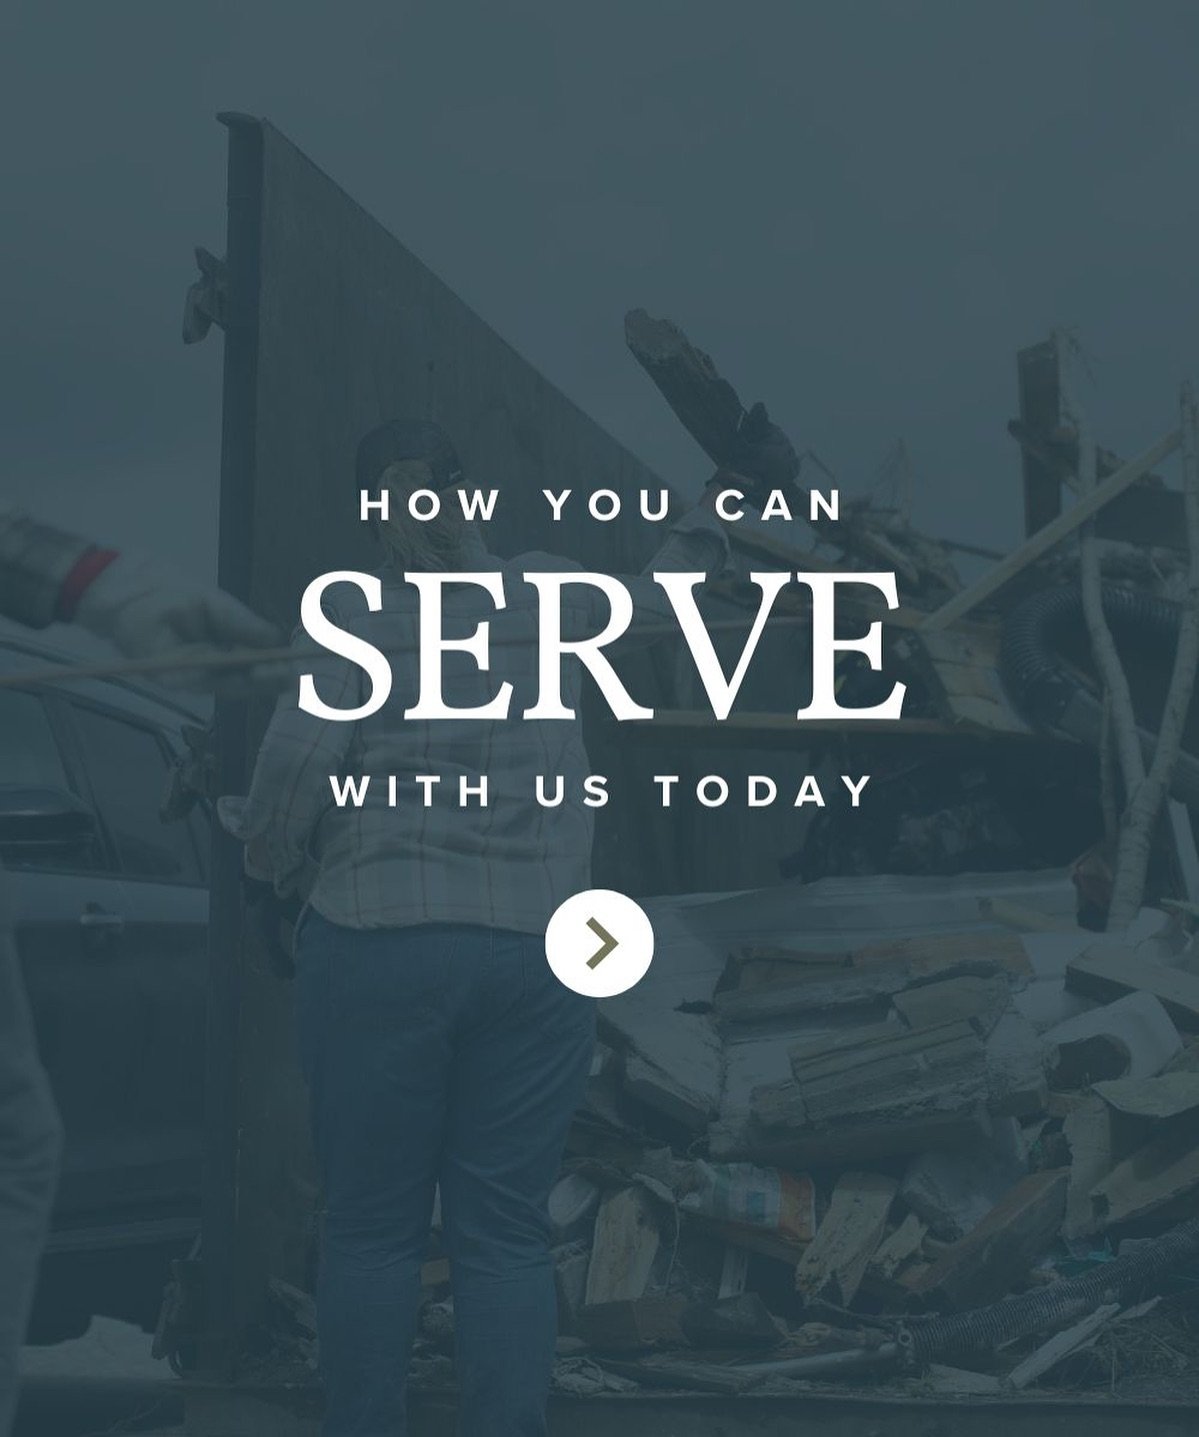 Join us today as we spend time serving together with Operation Blessing, as they have been coordinated right here at PassageWay Church.&nbsp;Throughout the week, the Operation Blessing team has been providing much-needed professional coordination to 